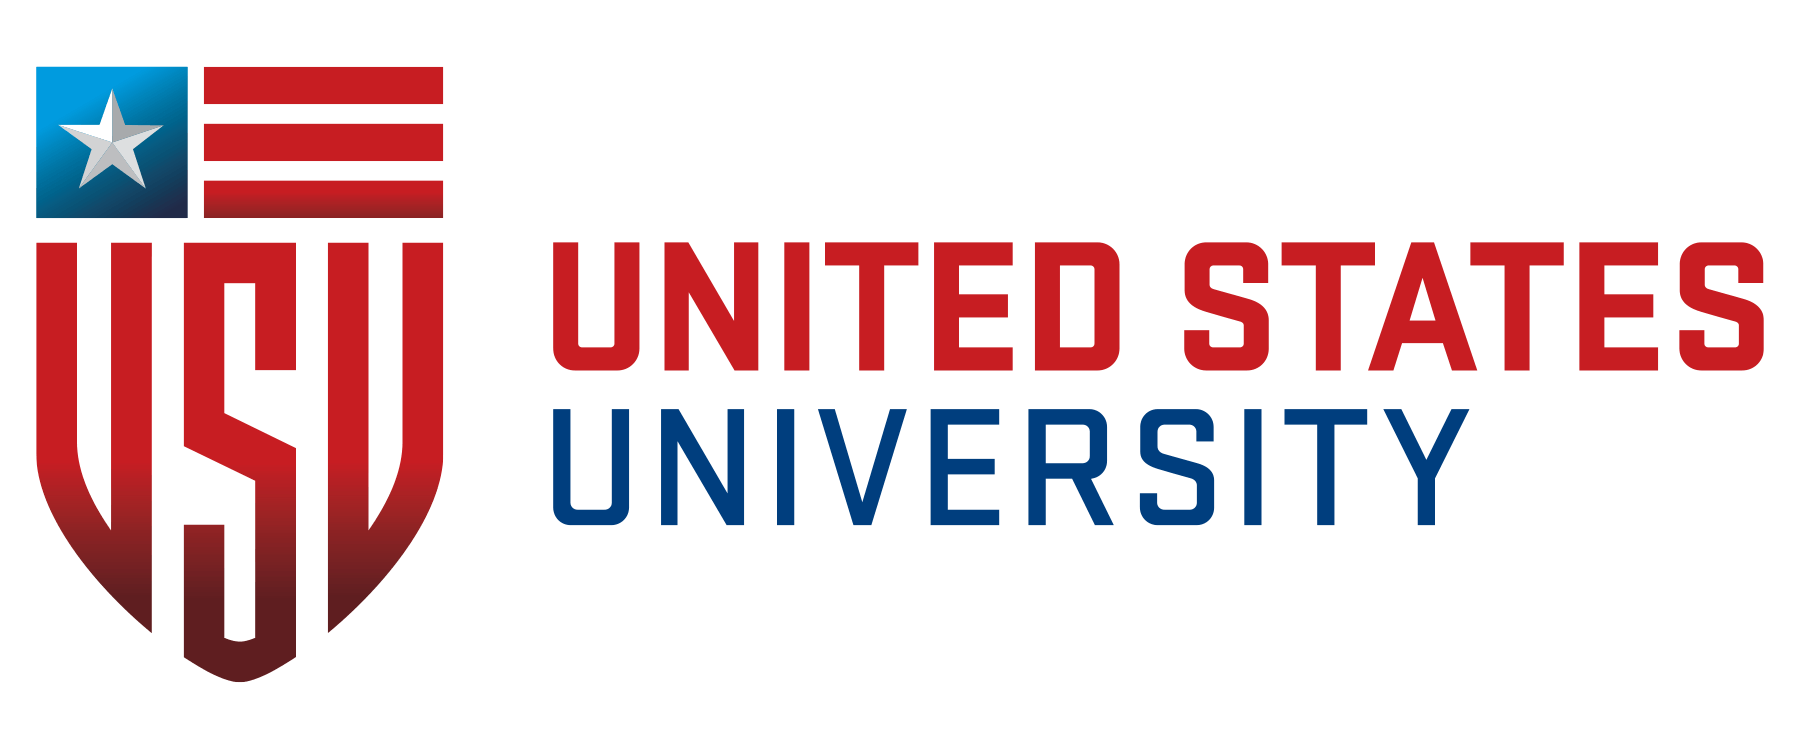 United States Logo - Announcing Our New Logo and Branding - United States University